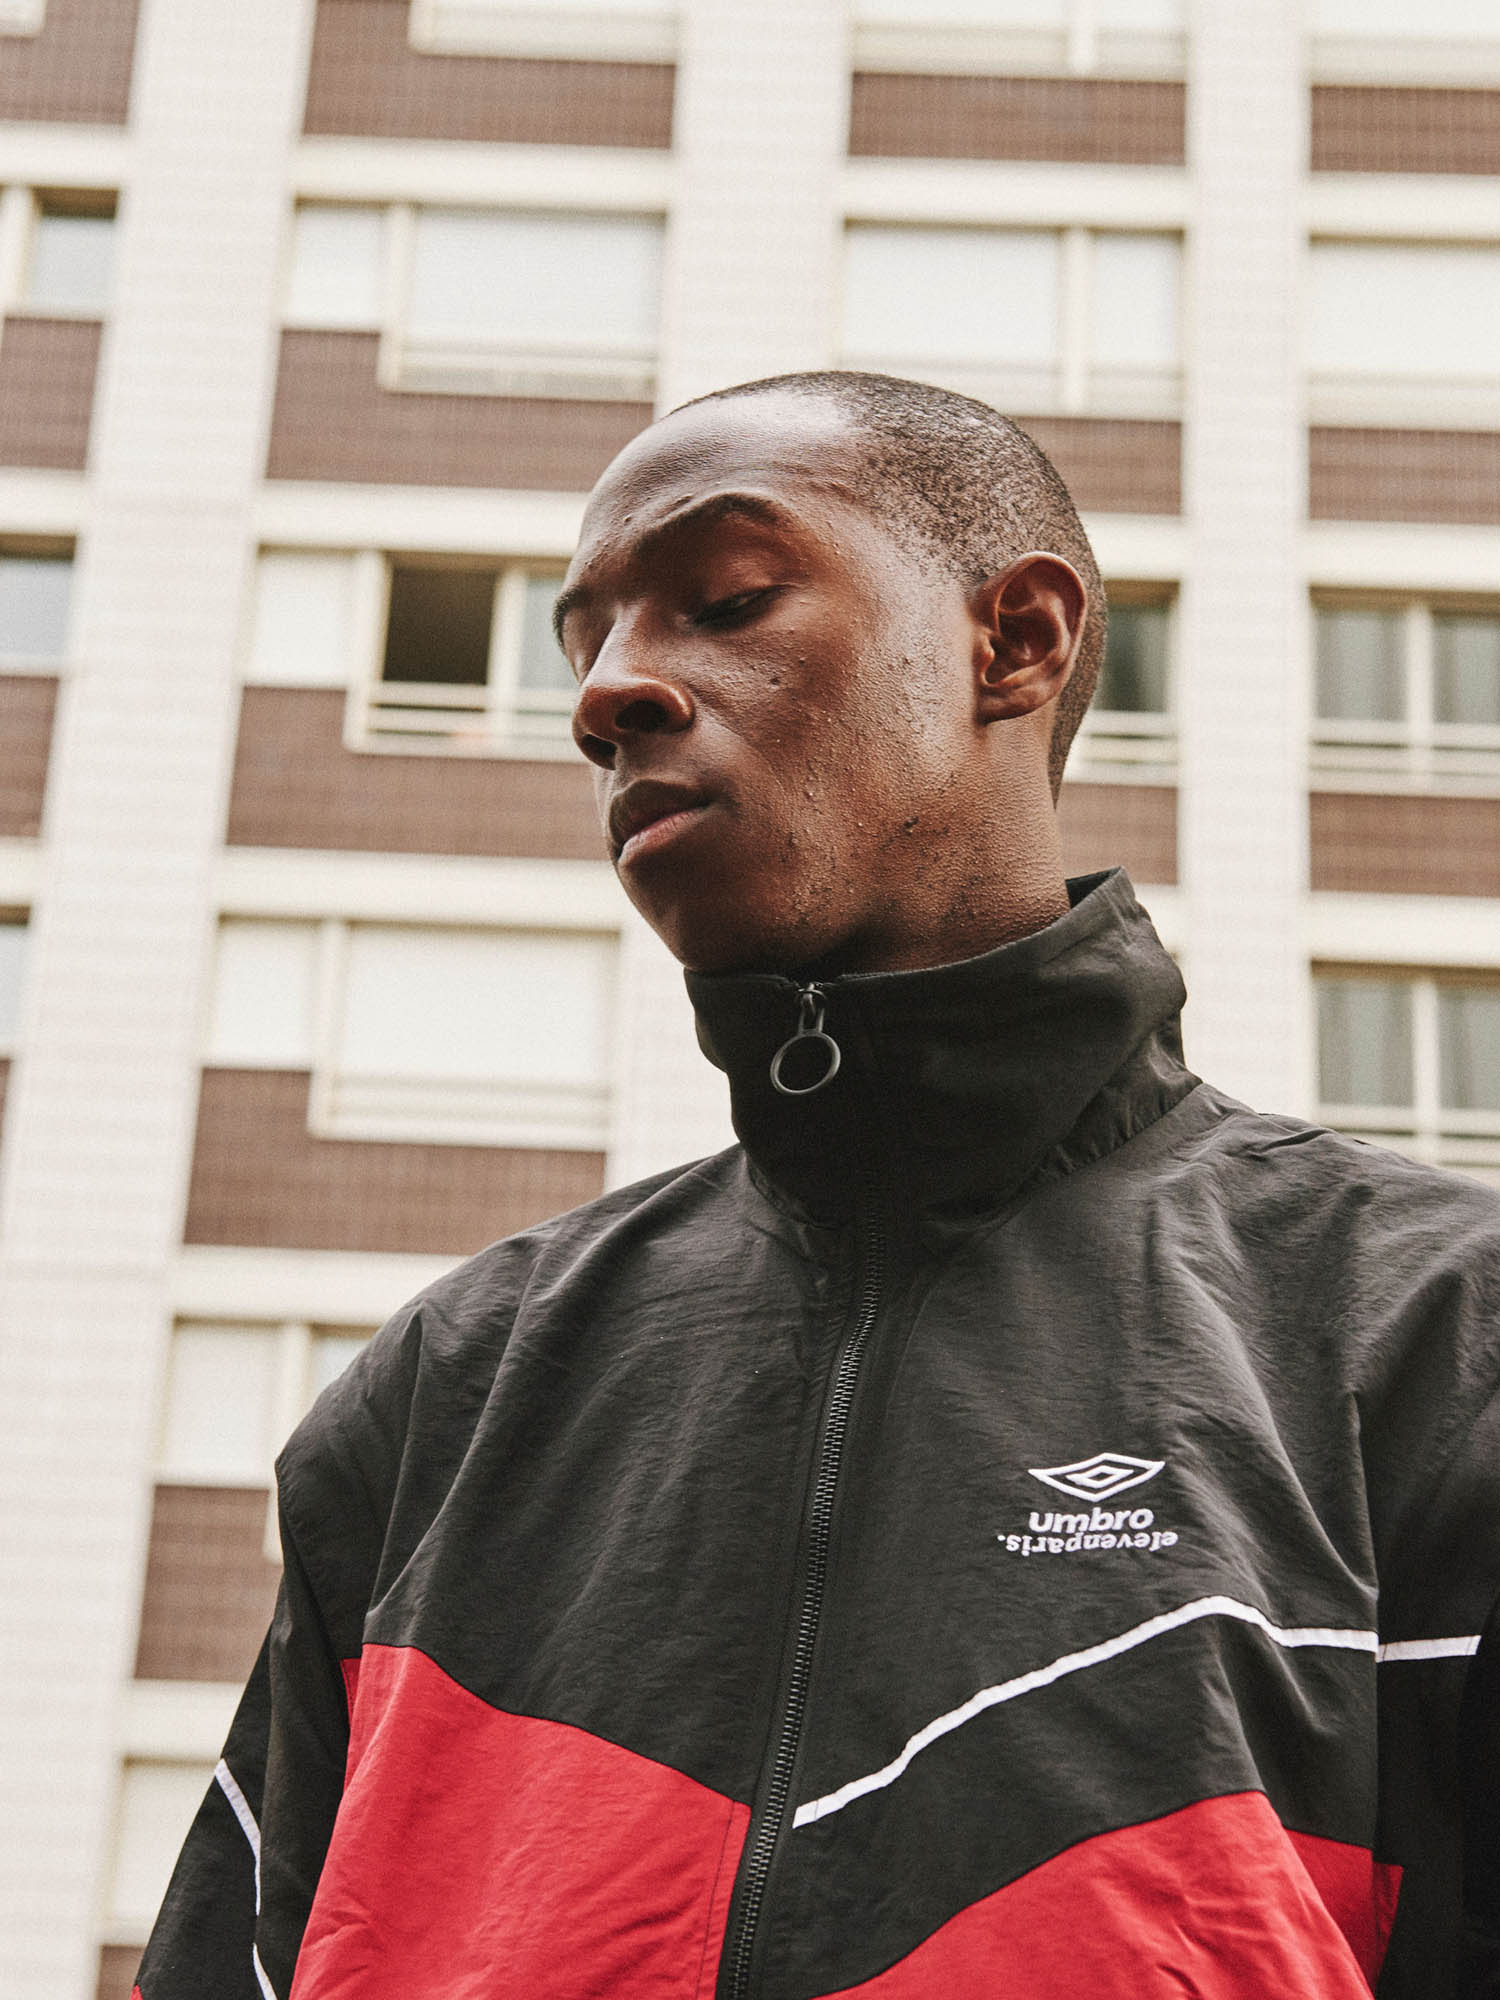 Umbro Collaborate With ELEVENPARIS for 90s Revival Capsule Collection ...